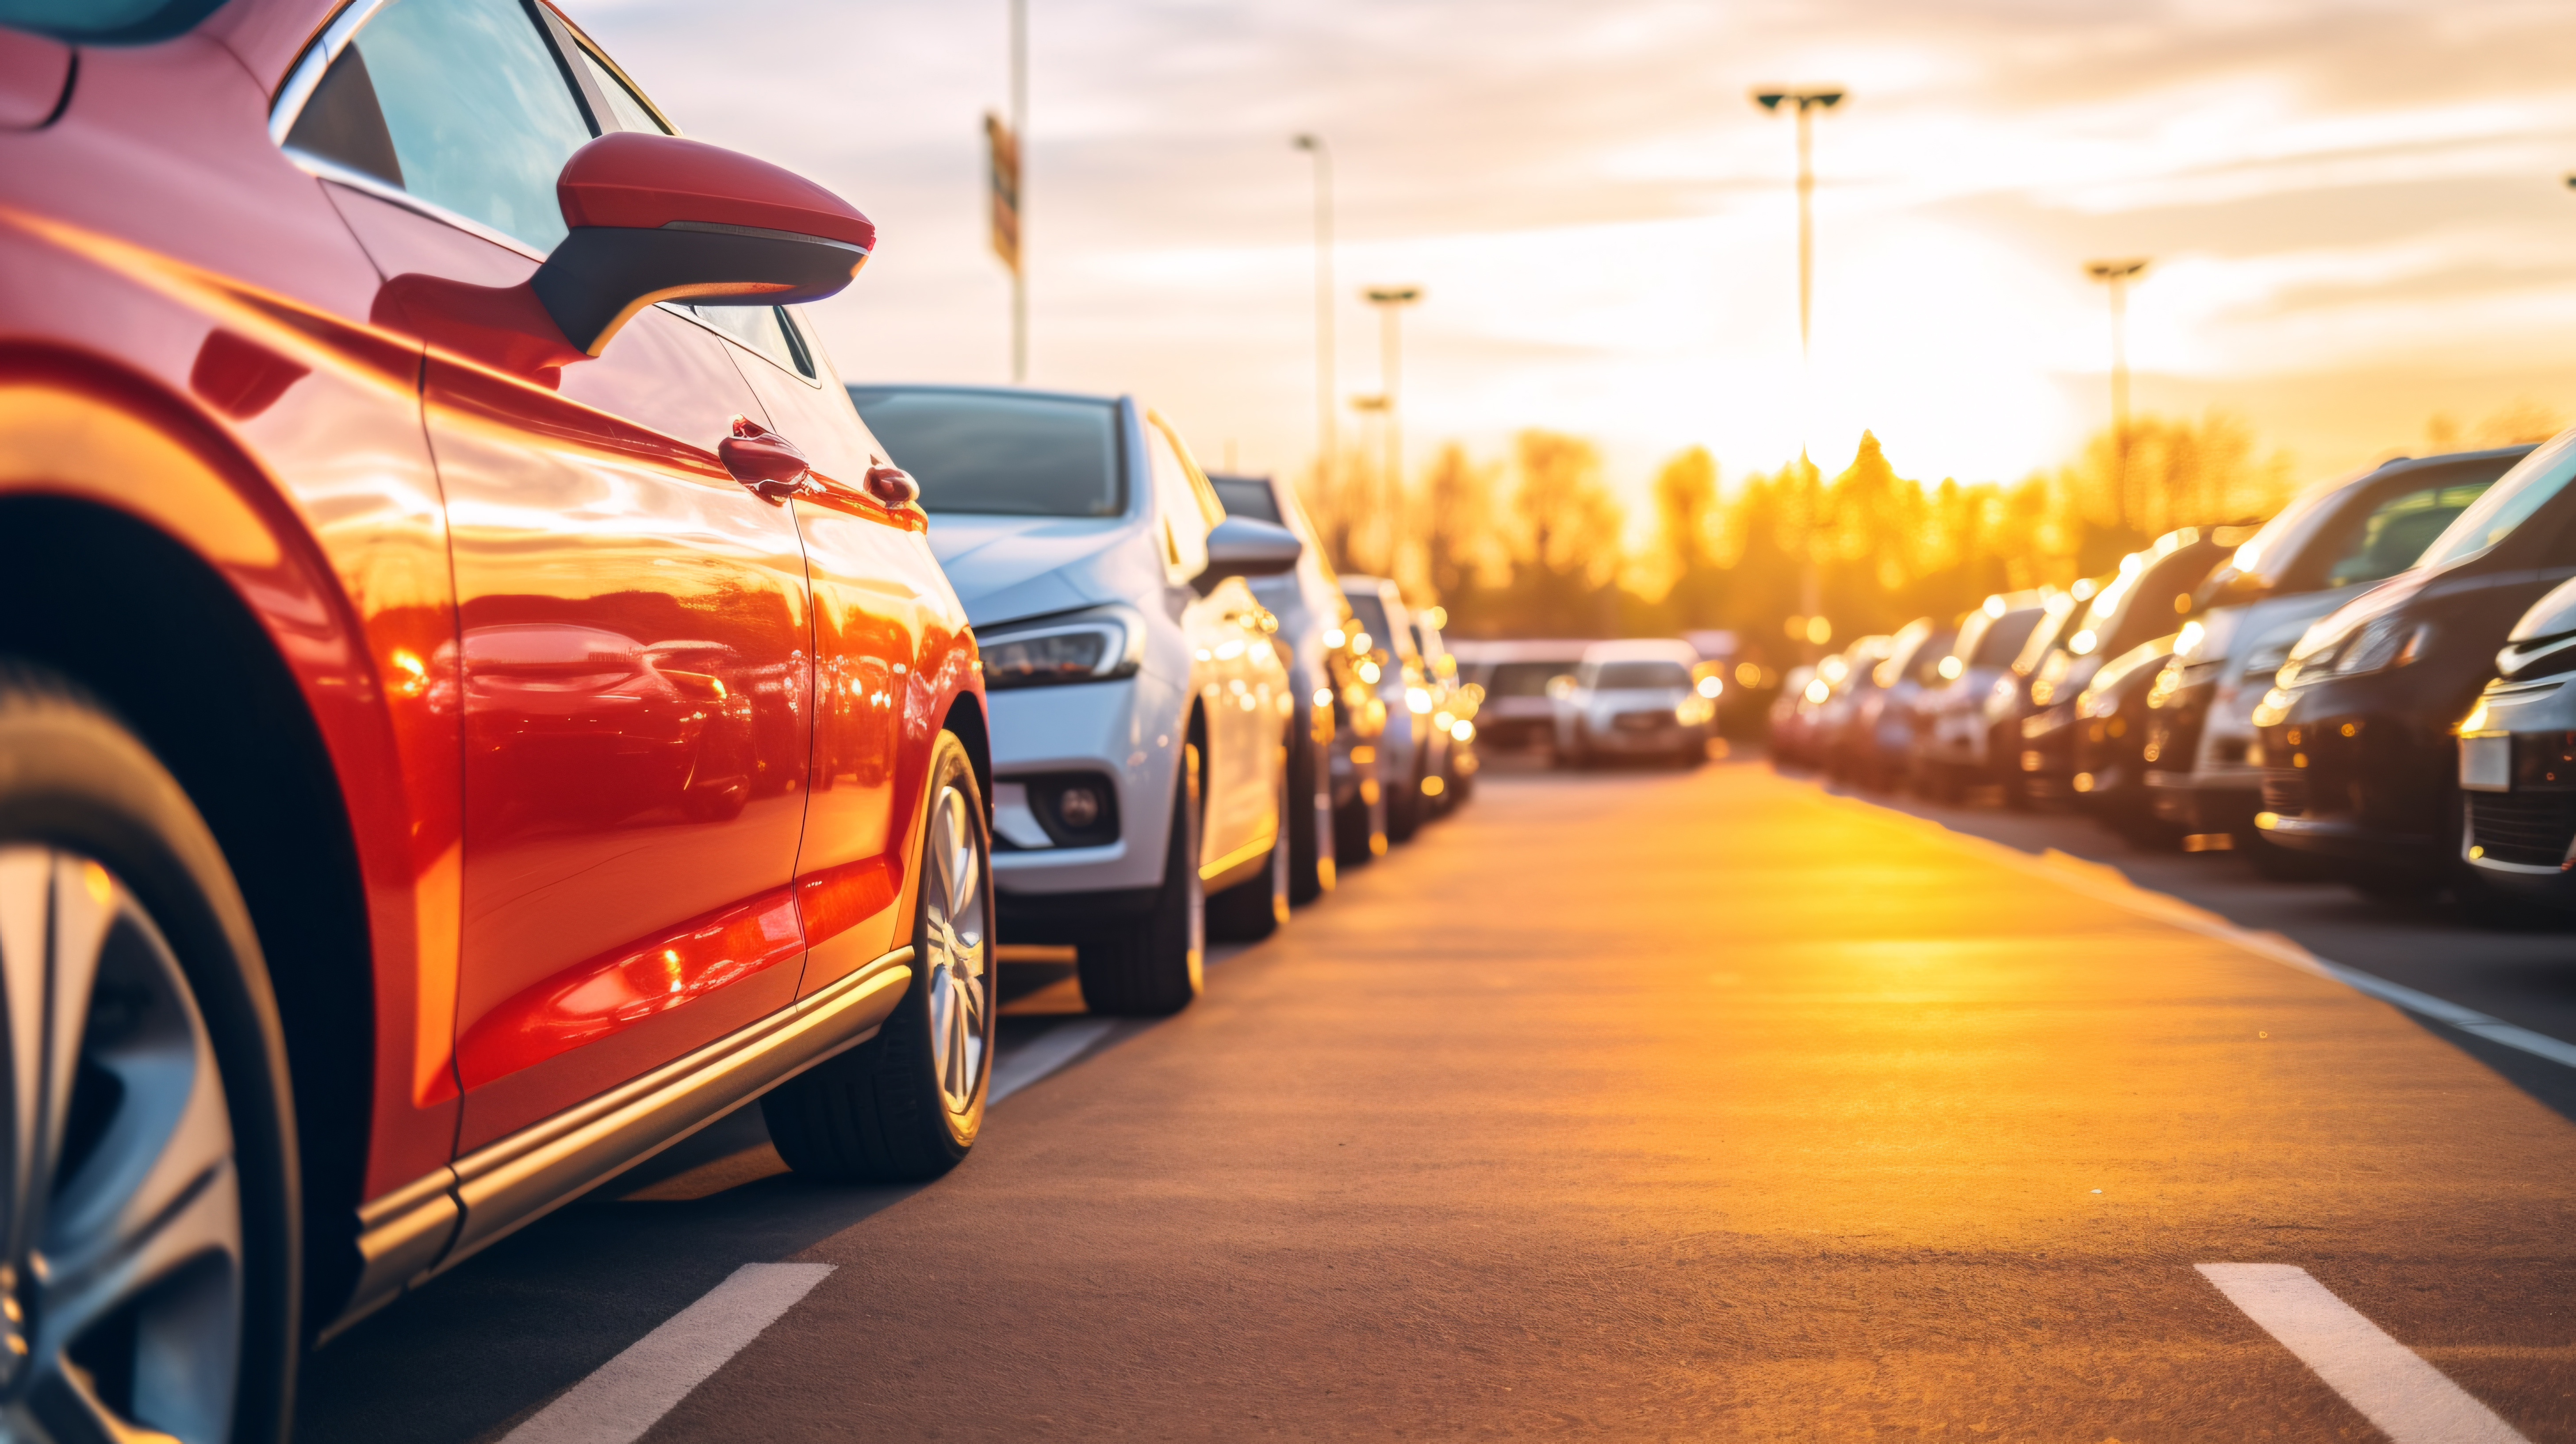 Investing in Car Park Spaces as a Smart Investment Option